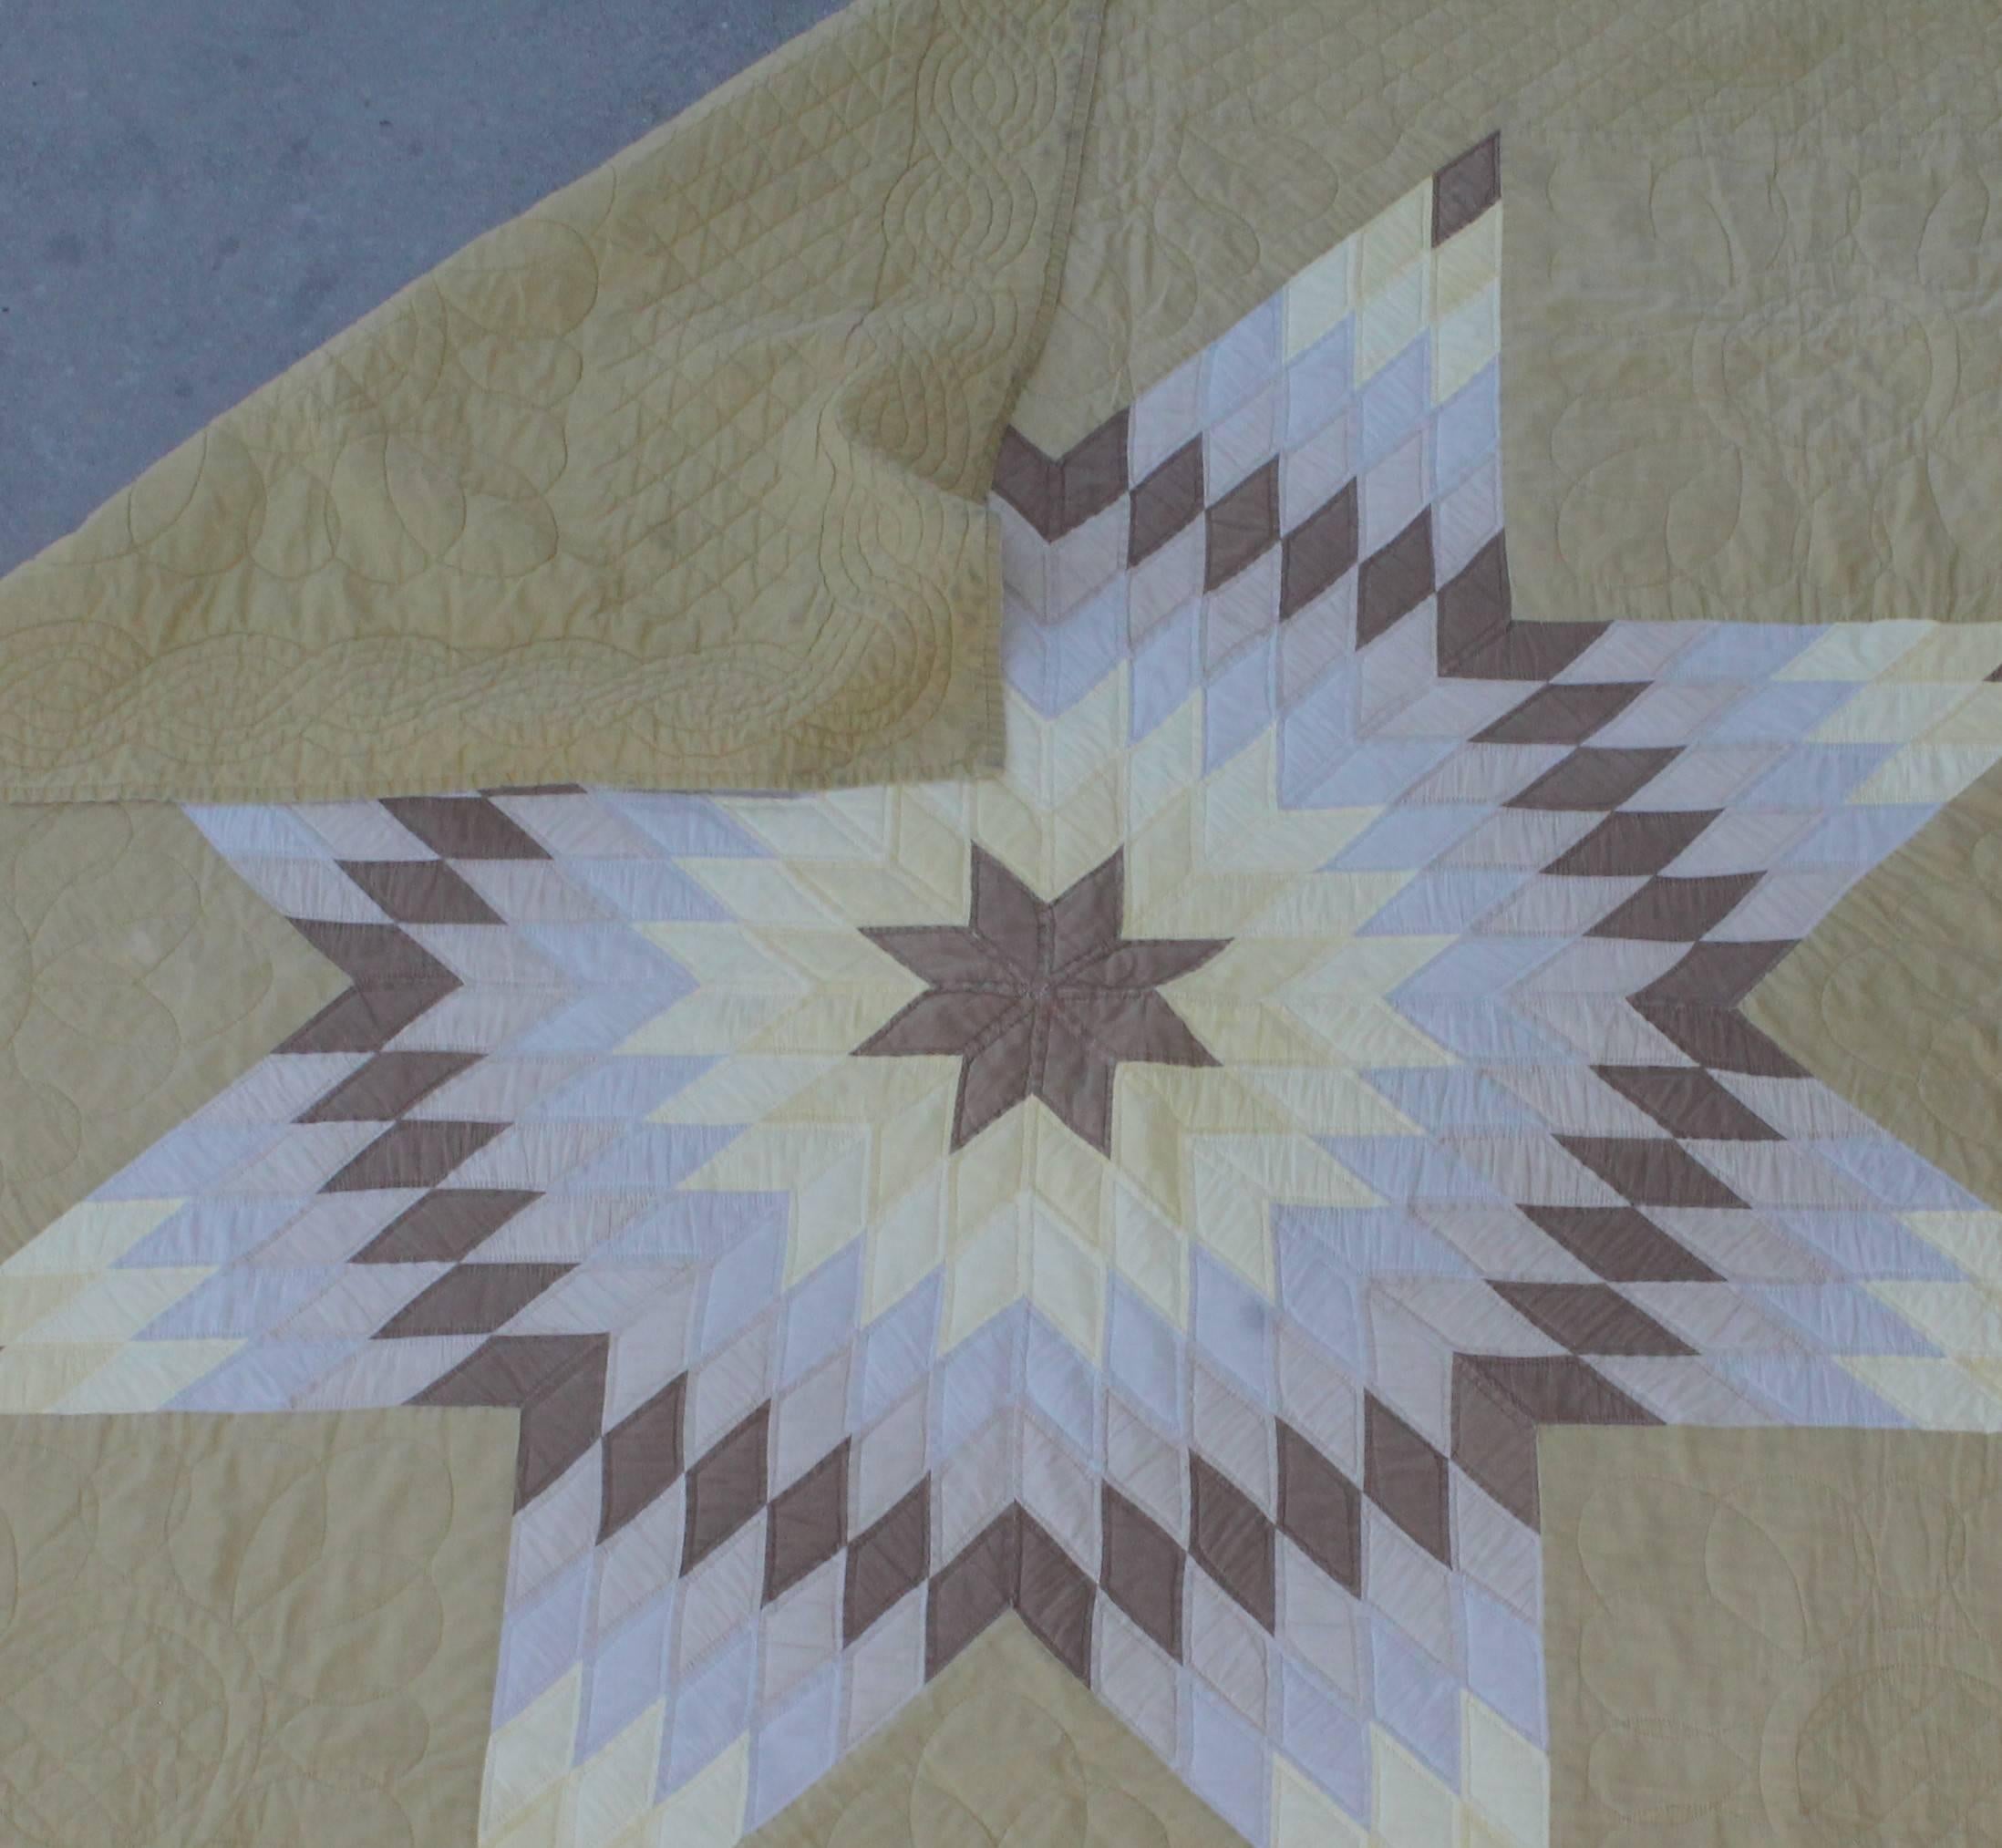 Country Amish Star Quilt from Holmes County, Ohio